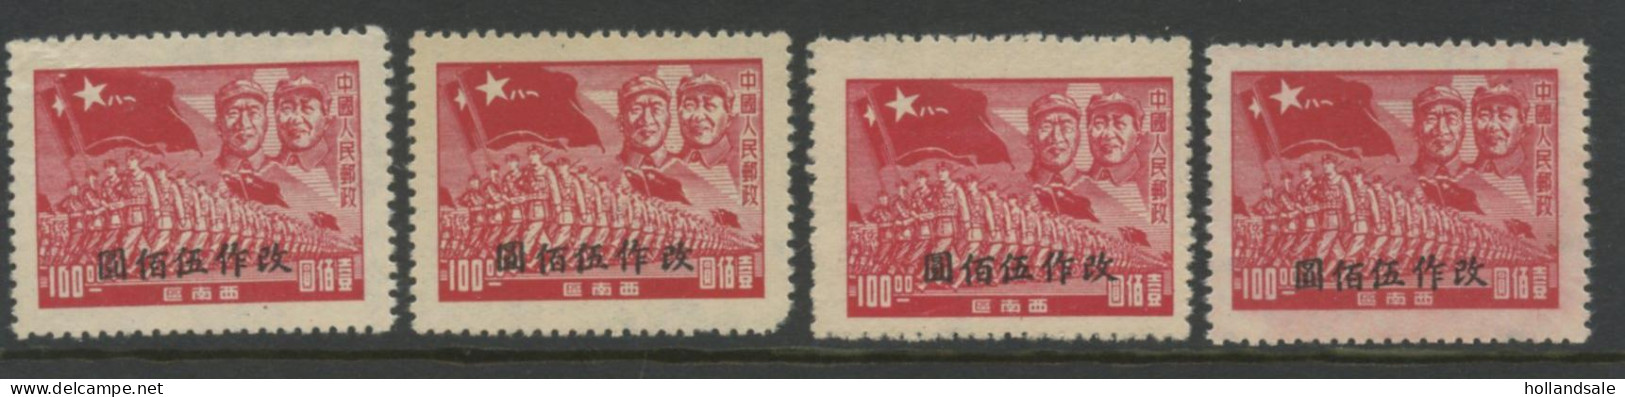 CHINA SOUTH WEST - 1950 $500 On $100 MICHEL # 36. Four (4) X. Unused. - Cina Del Sud-Ouest 1949-50